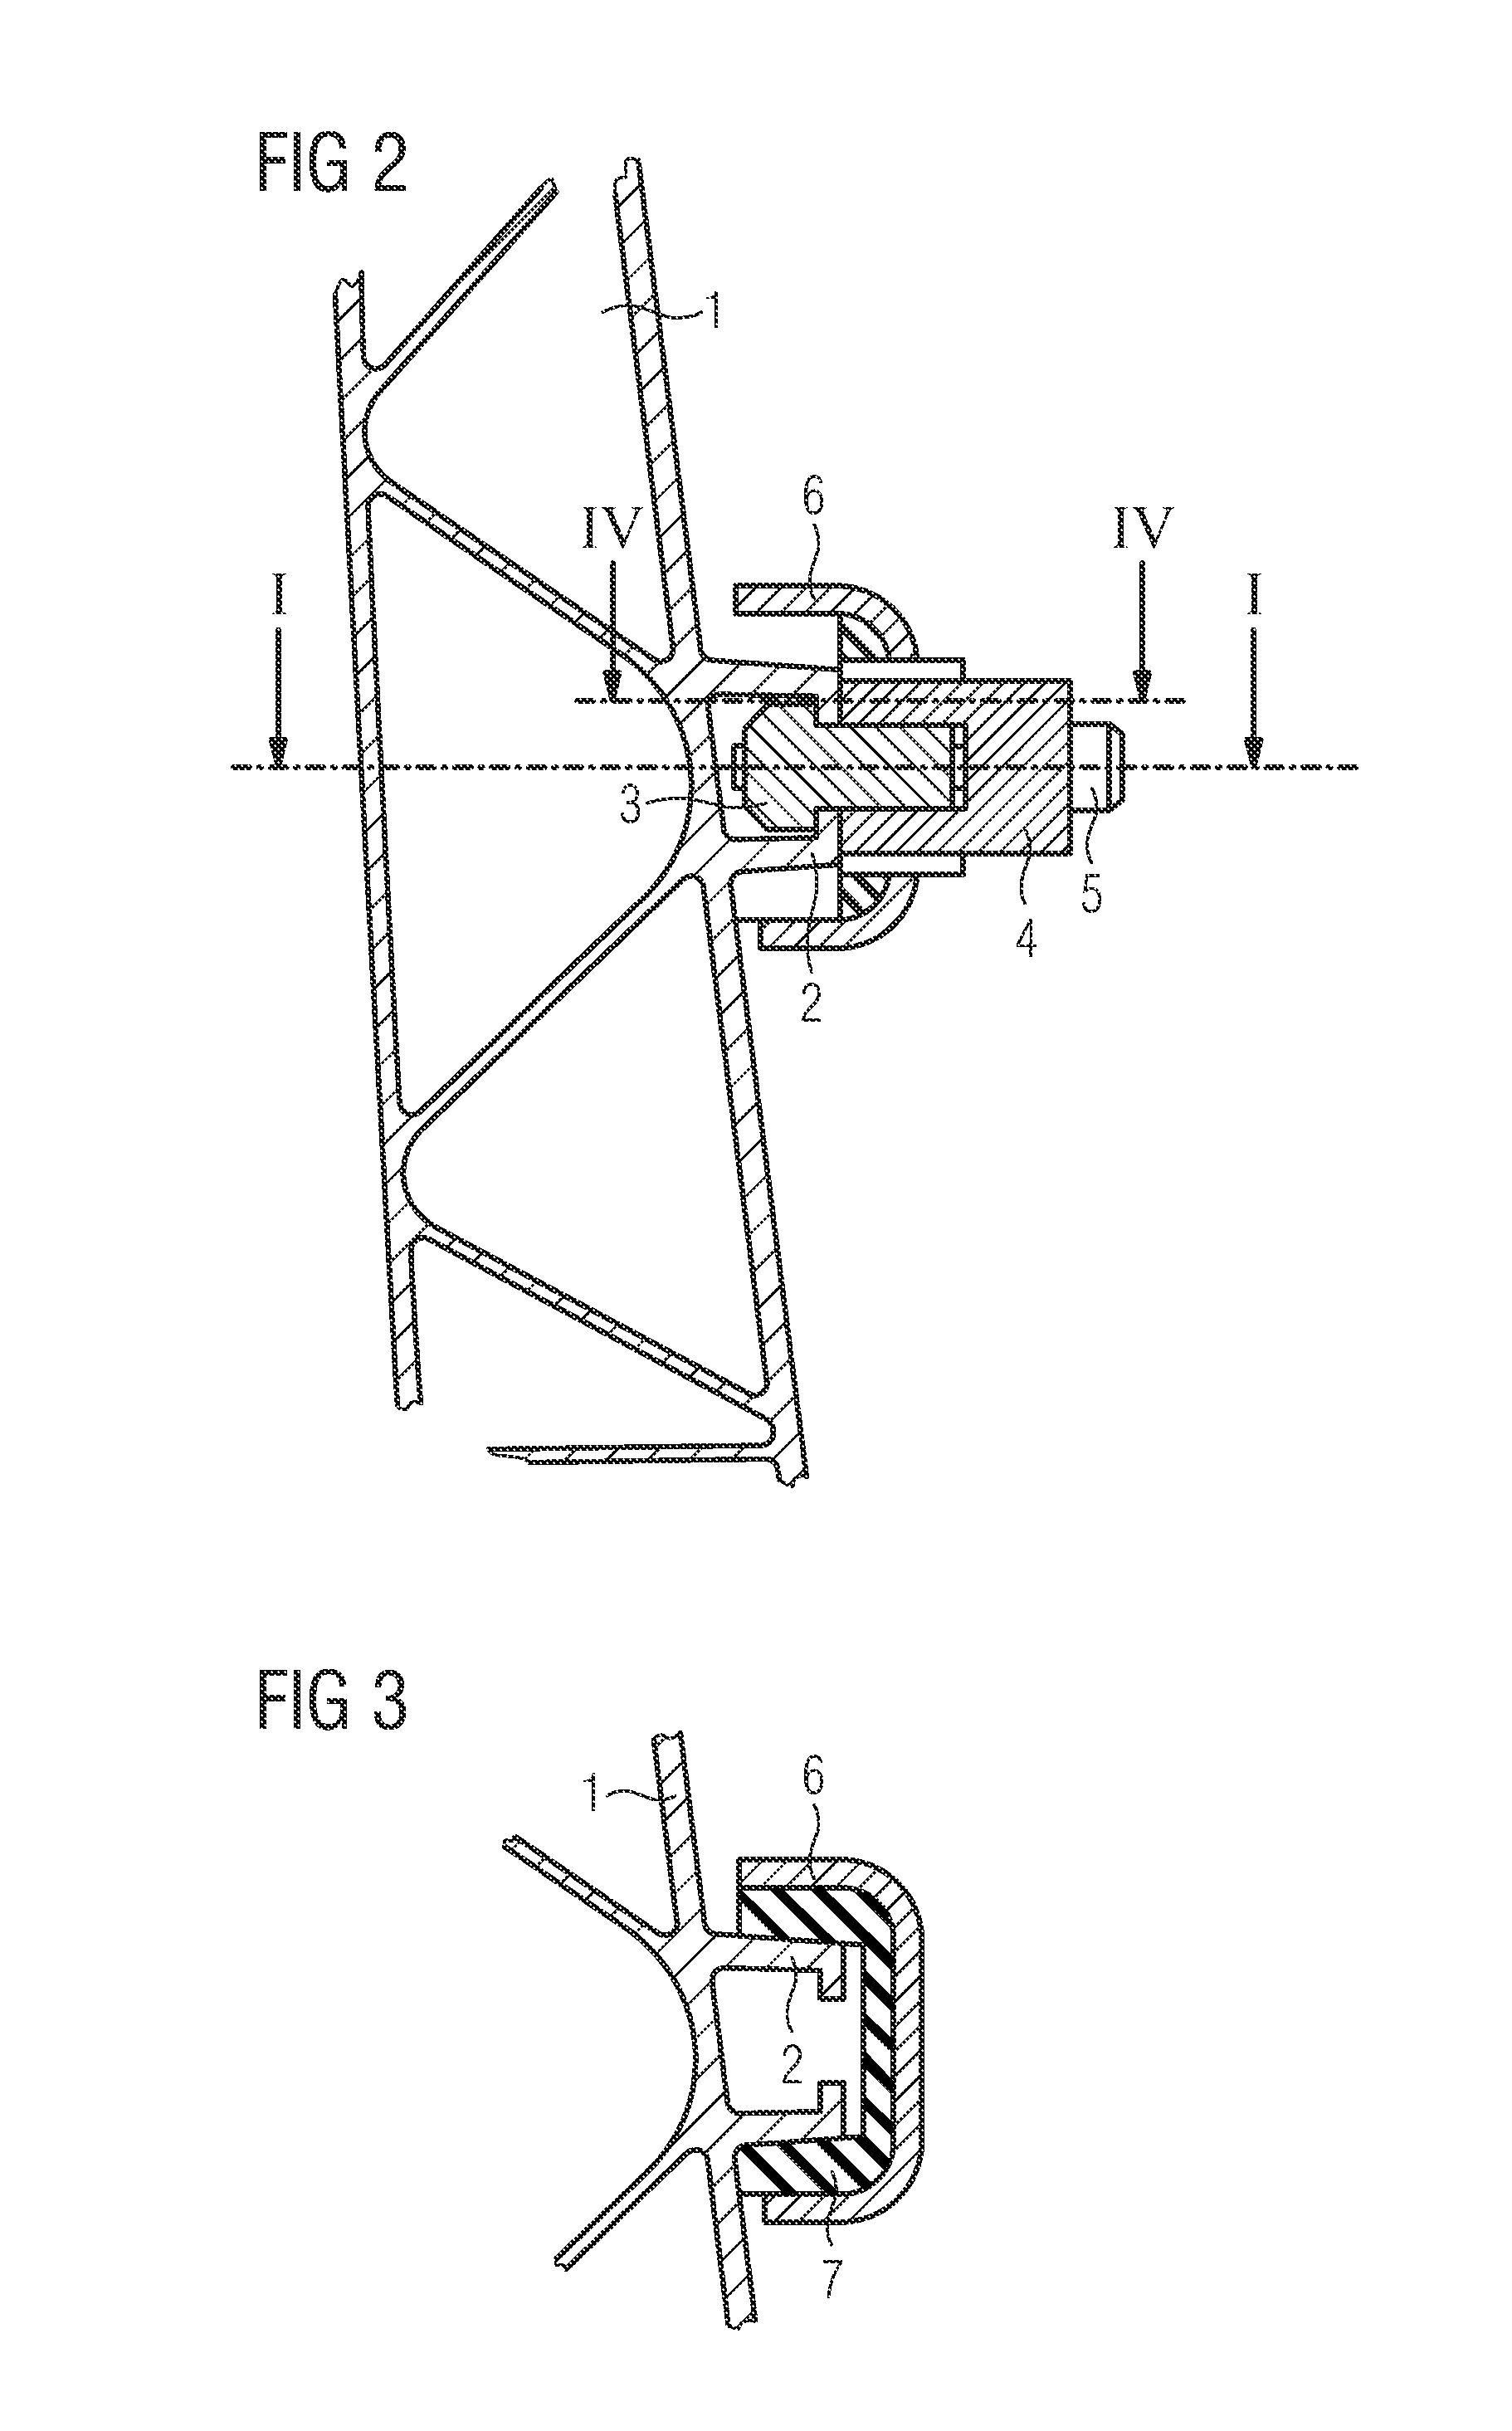 Fastening arrangement for a wall-supported and floor-supported element of an interior fitting of a vehicle